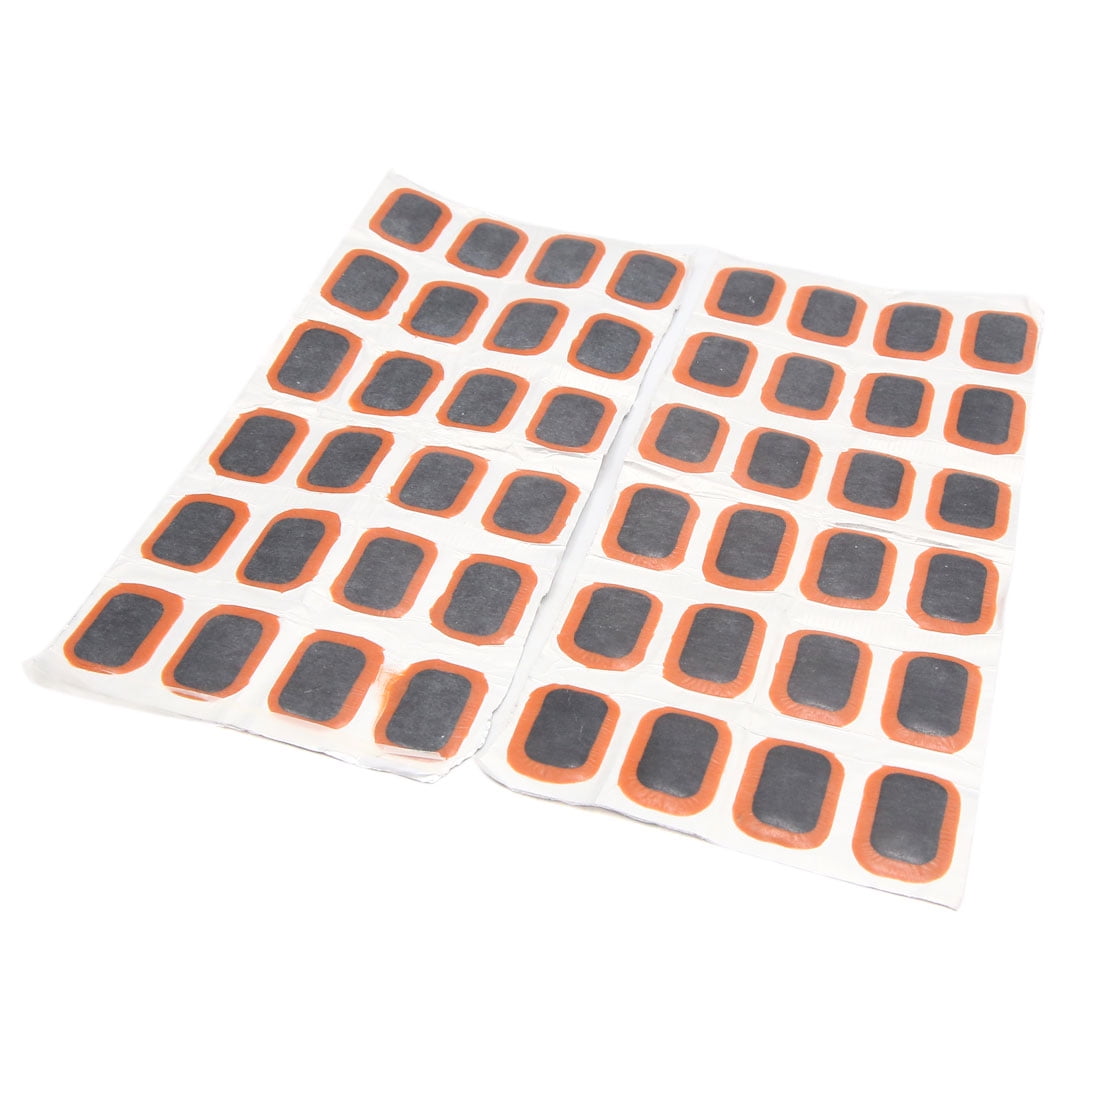 48pcs Tyre Puncture Patches Tire Repair Rubber Patch Tool for Auto Car 24 x 35mm